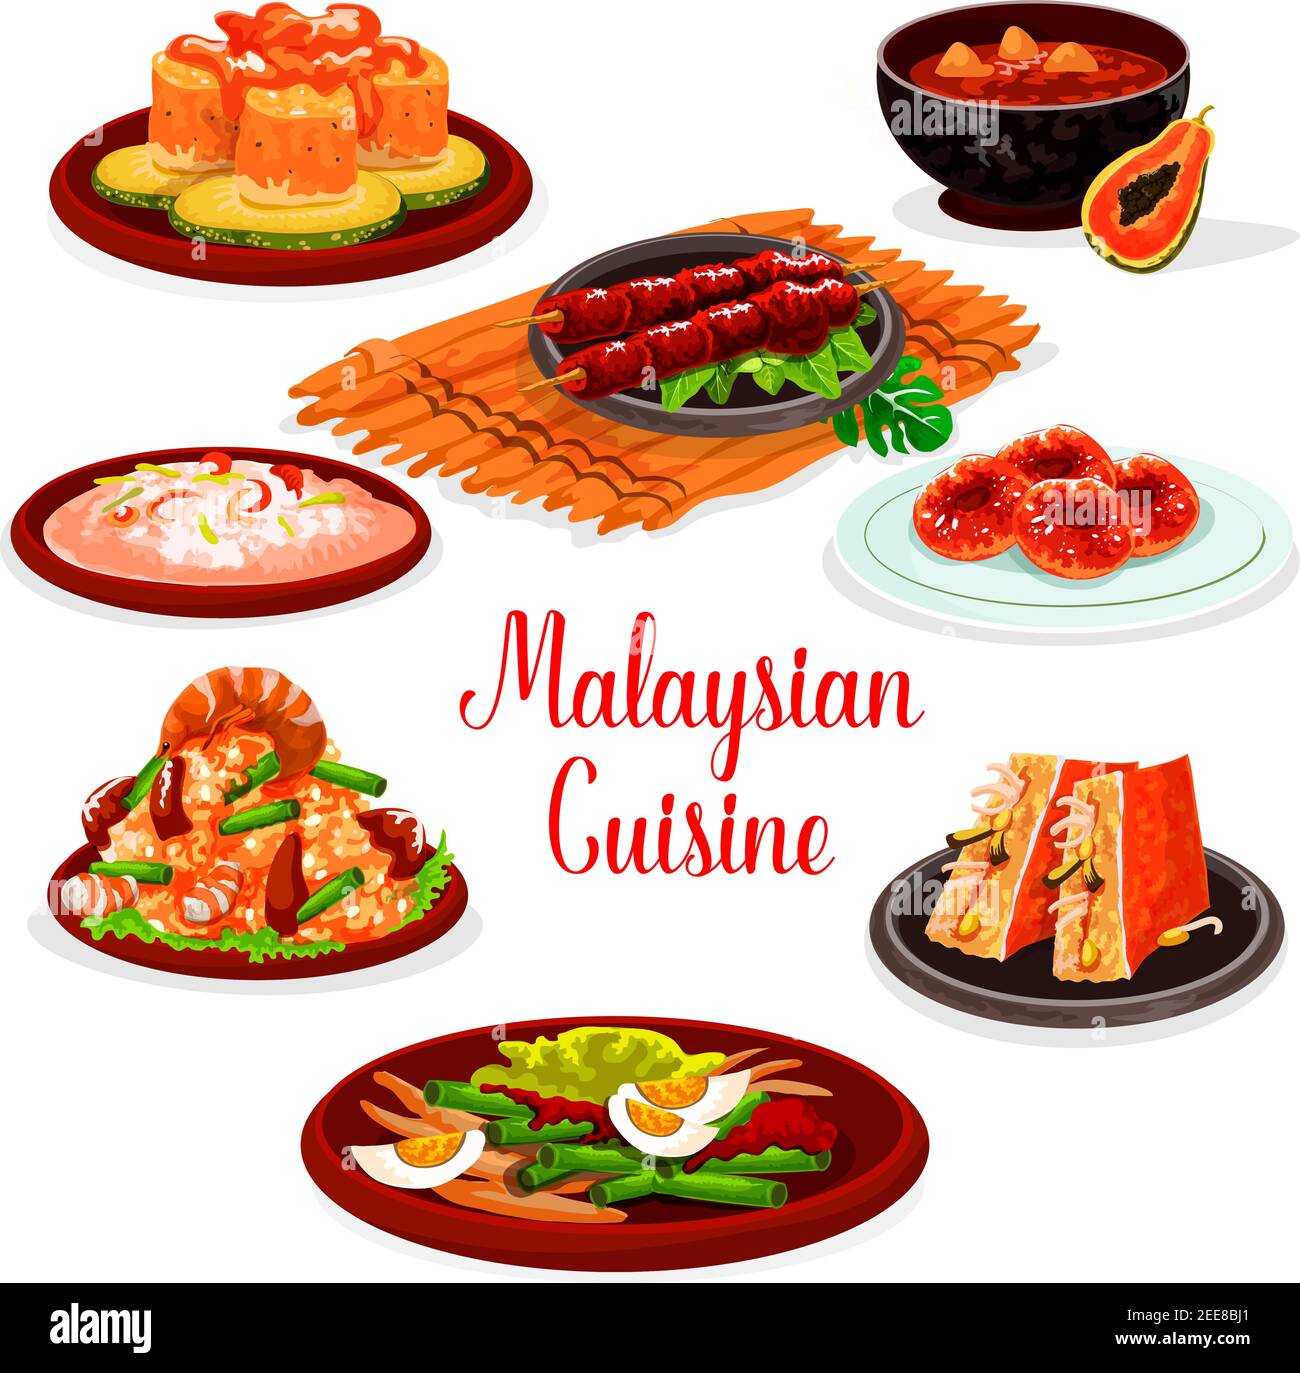 Malaysian cuisine restaurant menu with traditional asian food. Fried rice with shrimp and green bean, seafood risotto, grilled chicken, stuffed tofu, Stock Vector